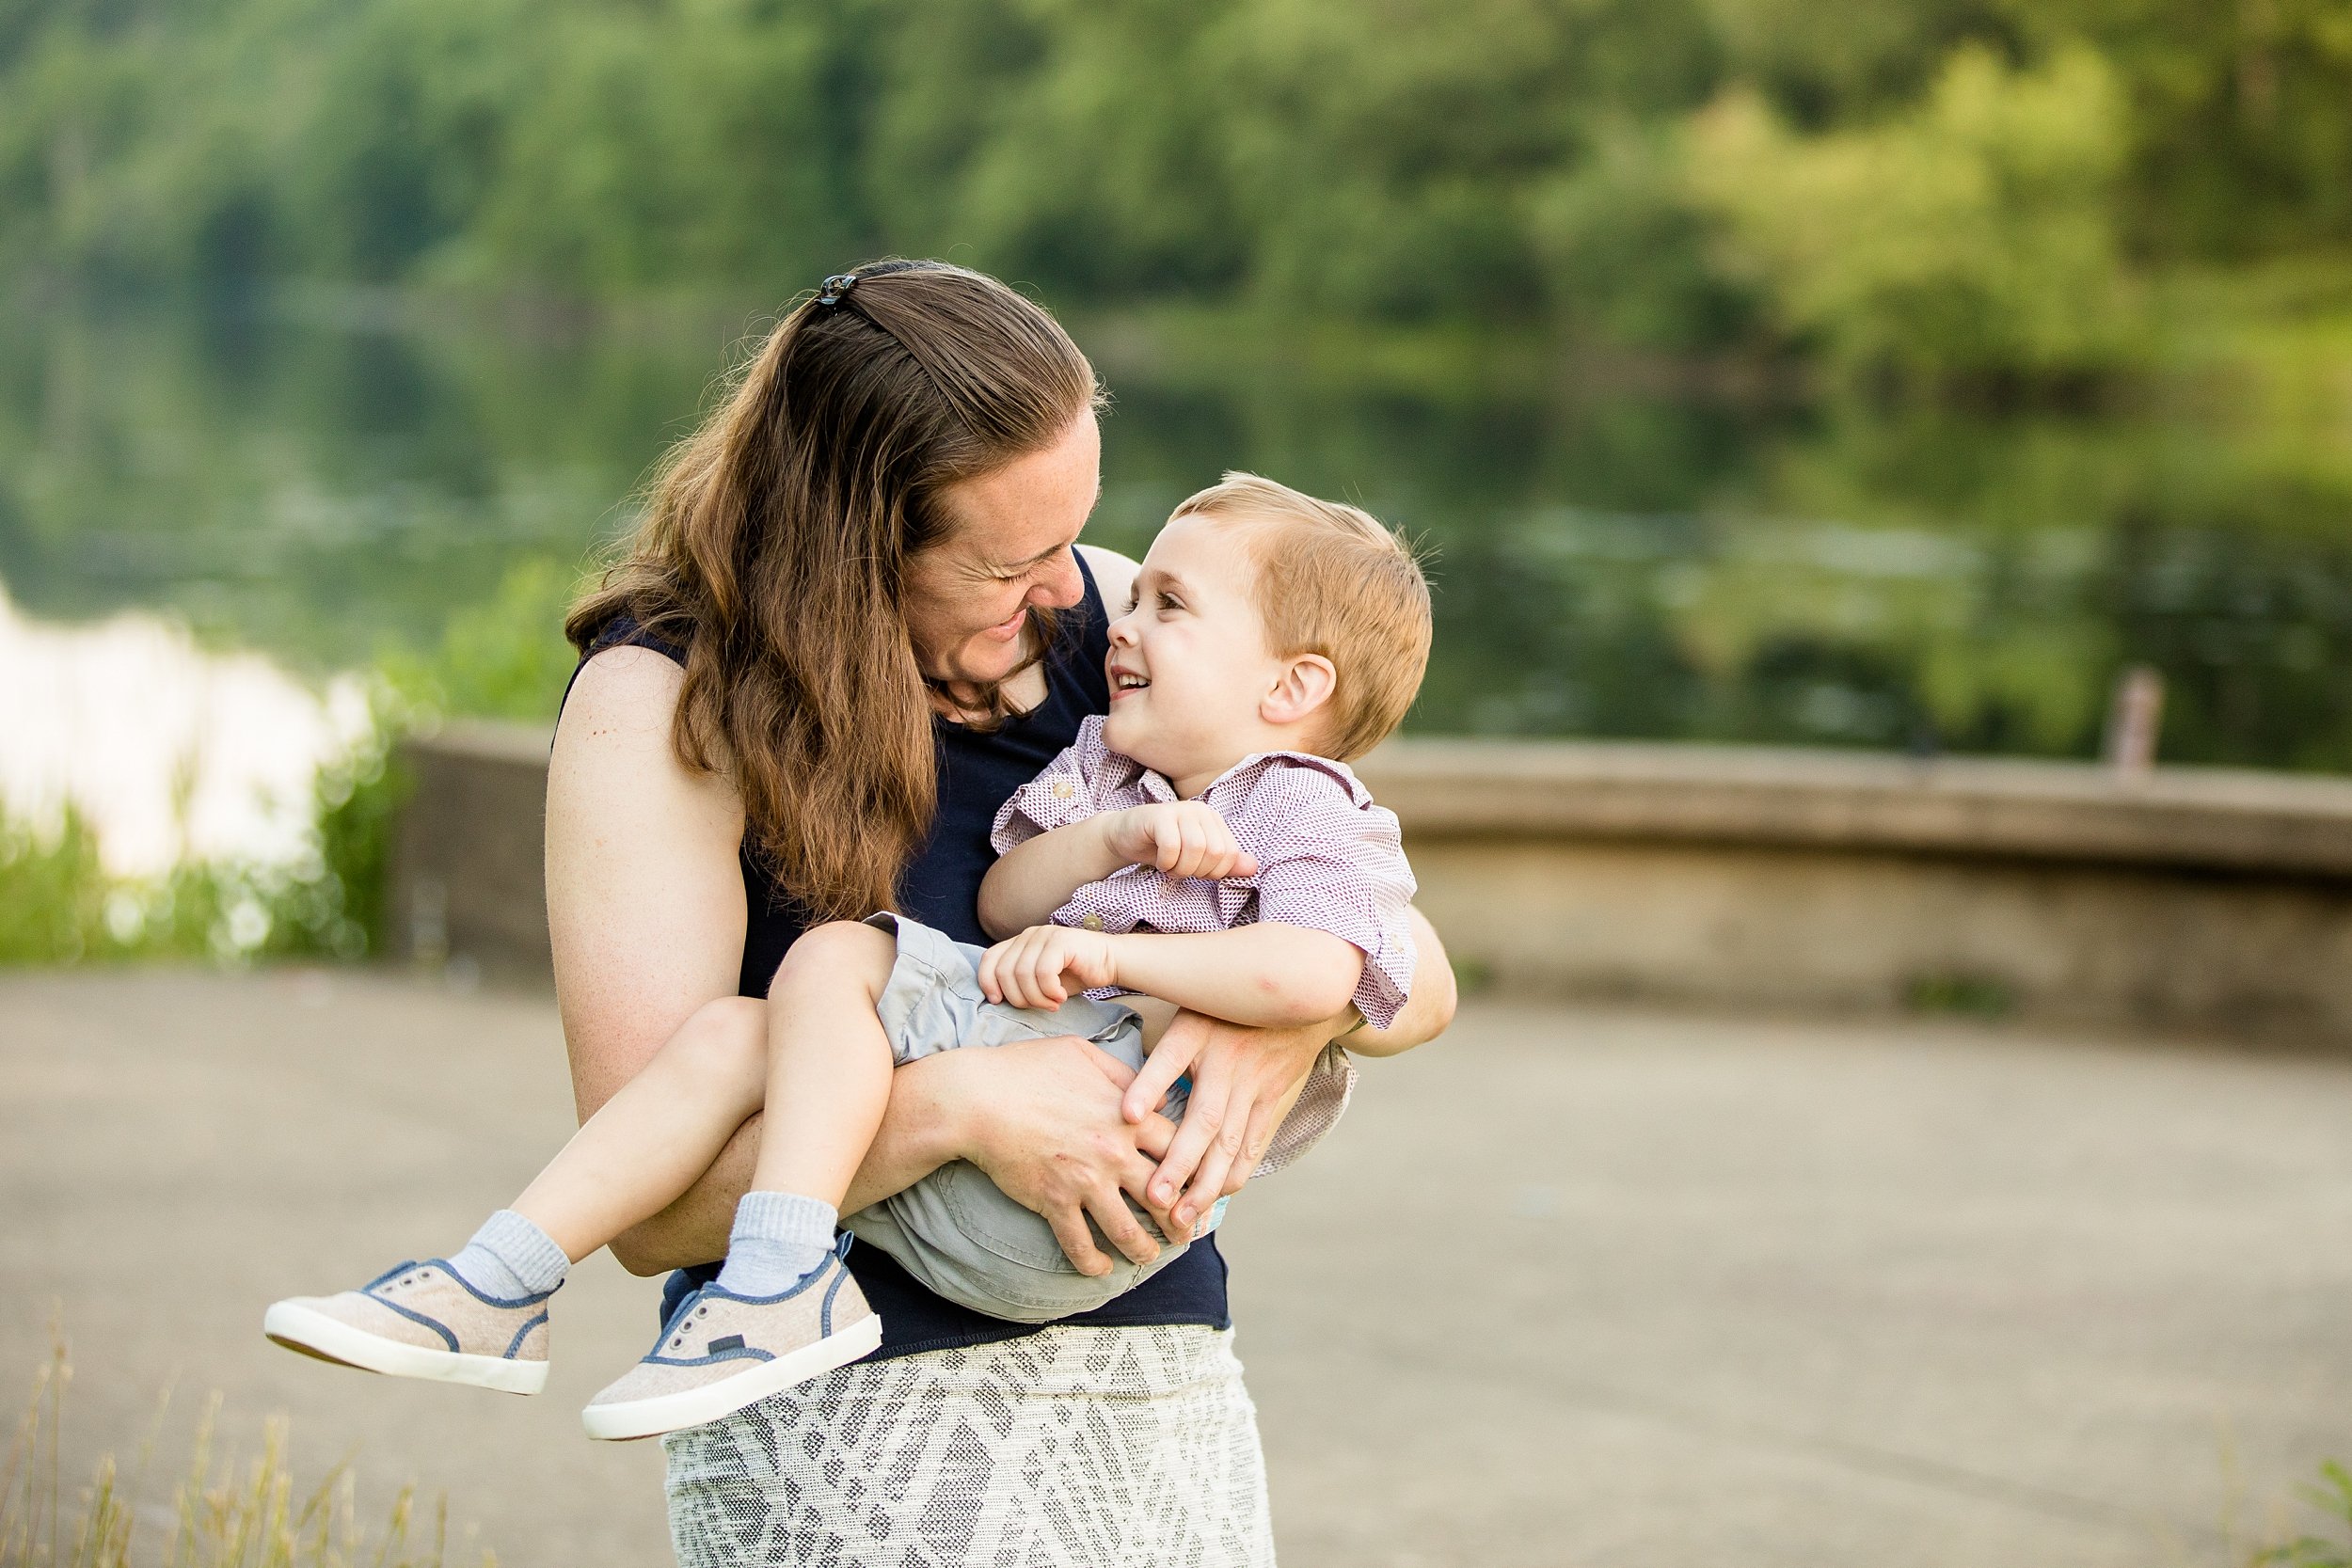 north park family photos, pittsburgh family photographer, cranberry township family photographer, zelienople family photographer, wexford family photographer